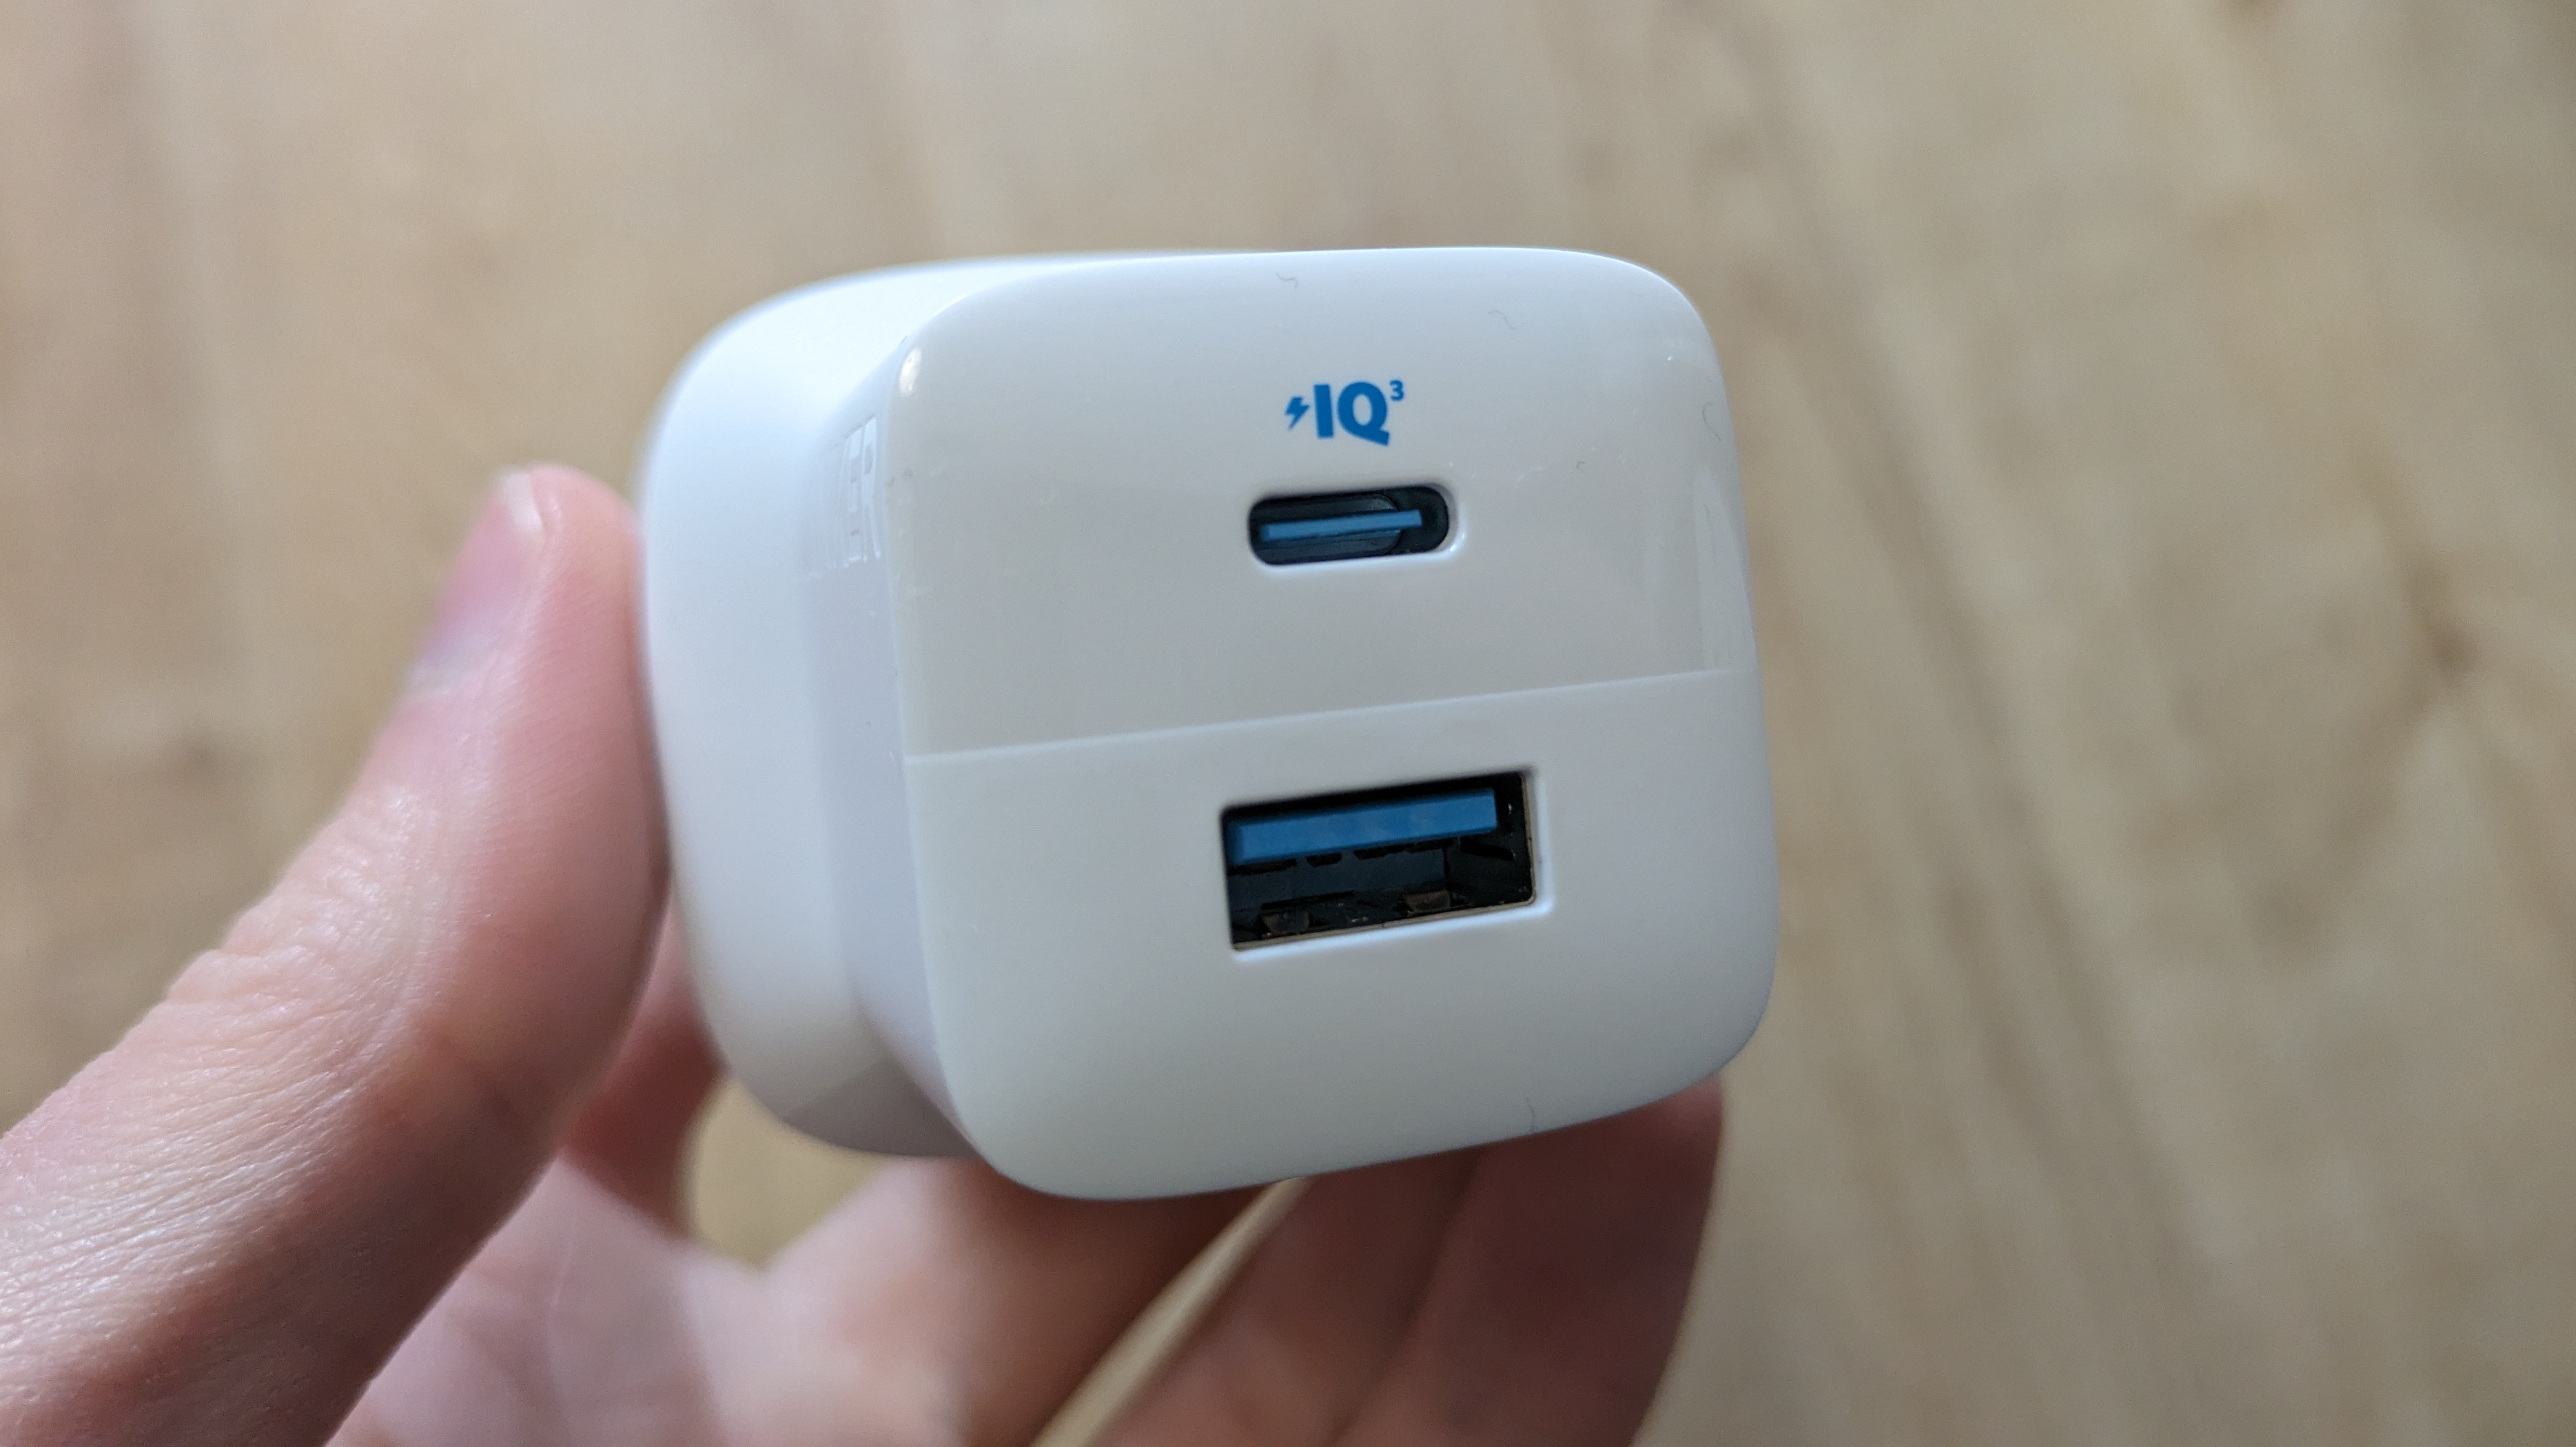 Anker 323 charger charger held in a hand, with USB-C and USB-A ports visible